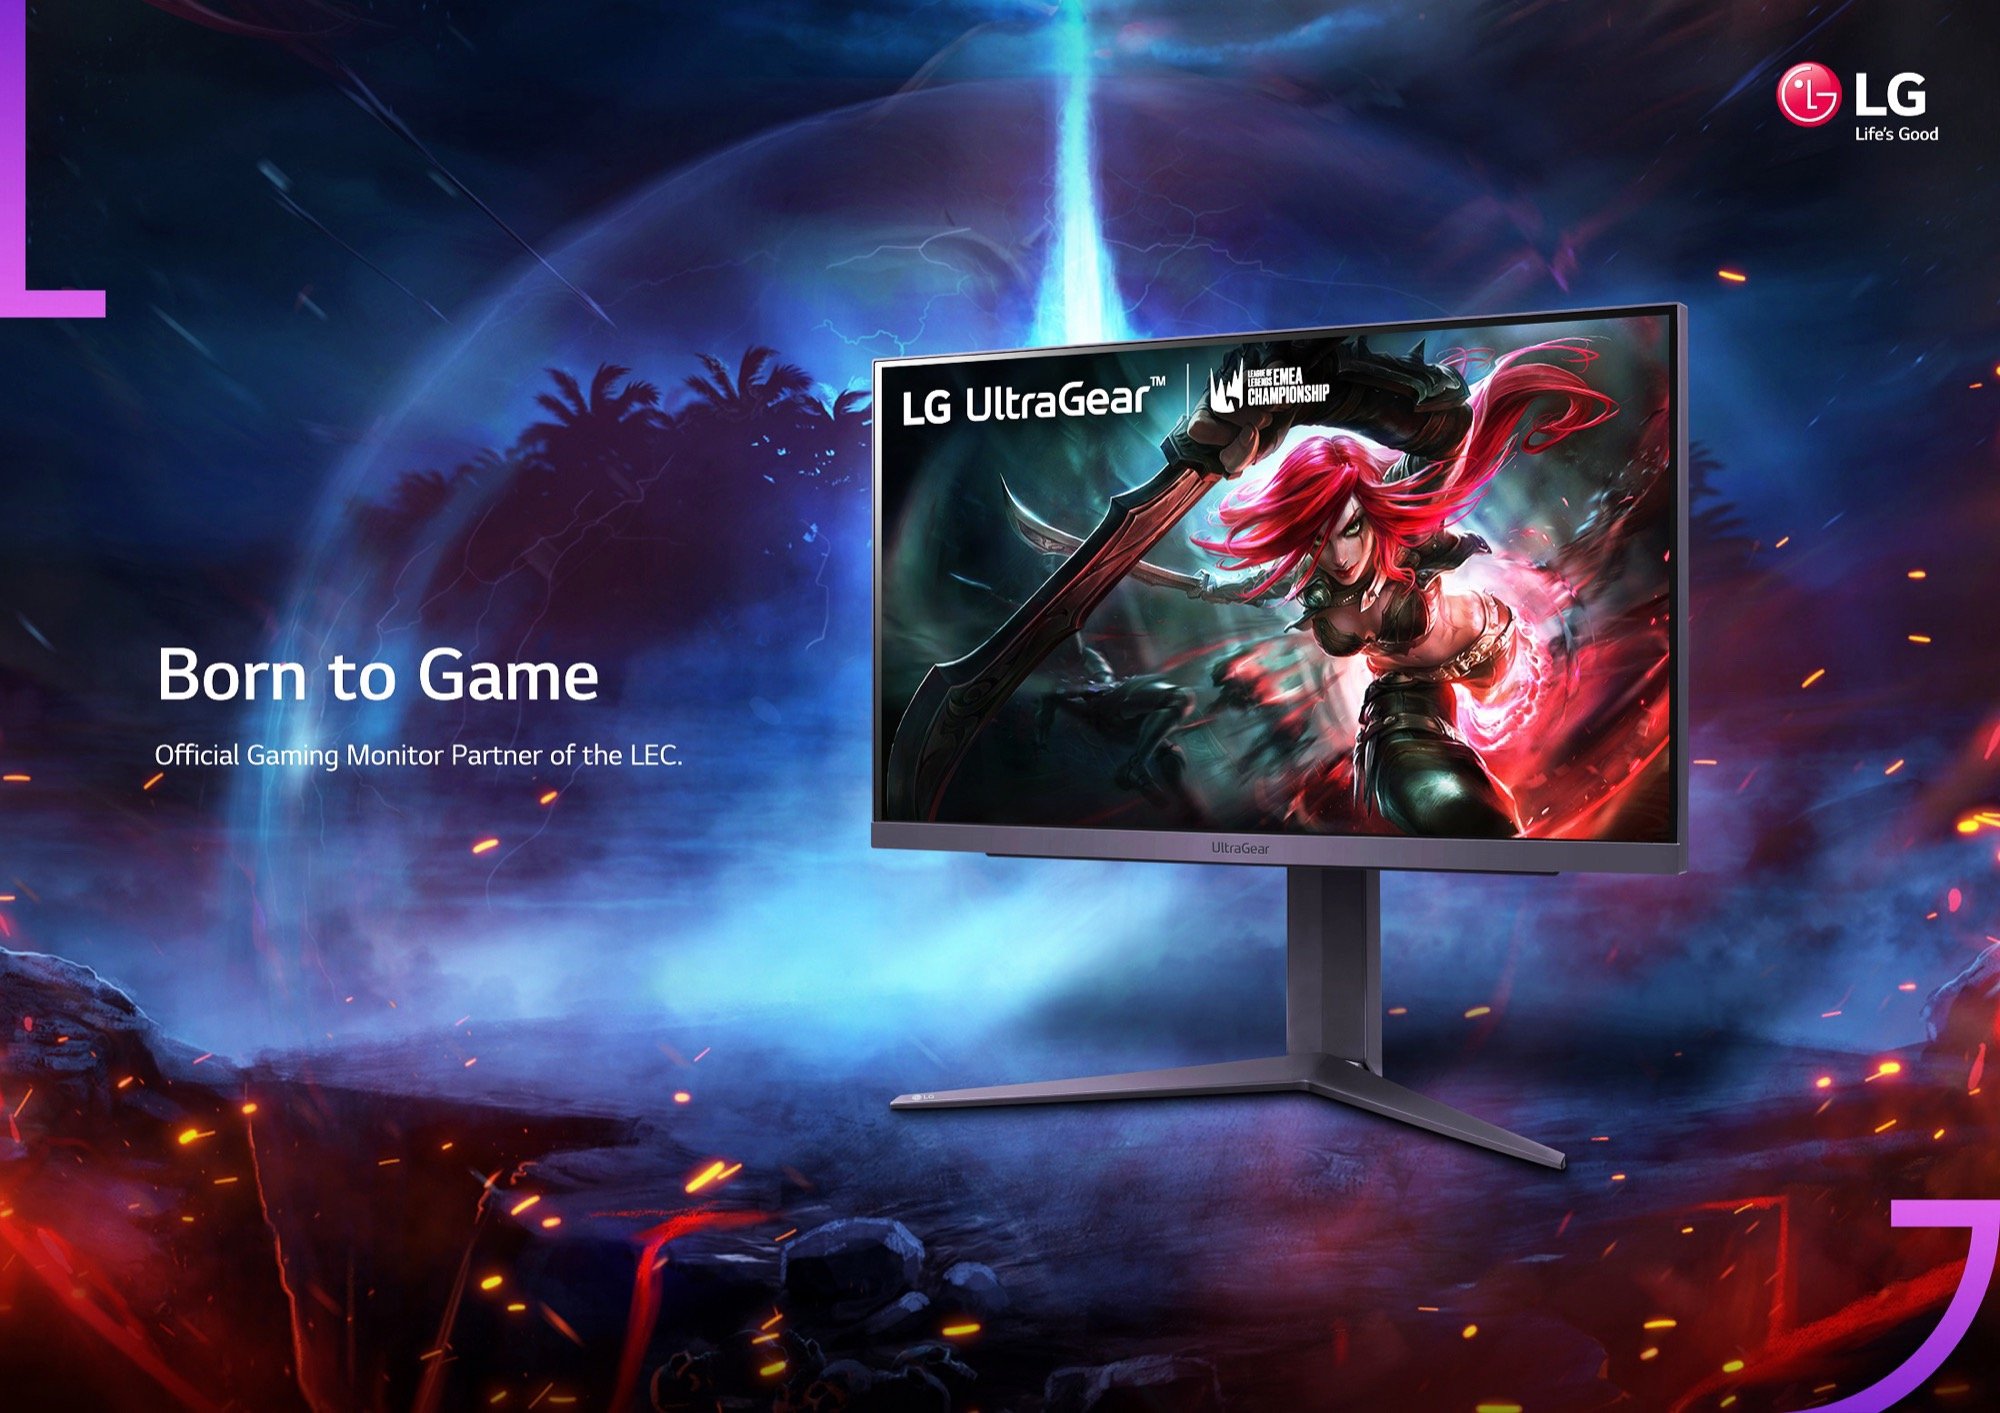 LG UltraGear 25GR75FG: 24.5-inch gaming monitor with 360 Hz refresh rate